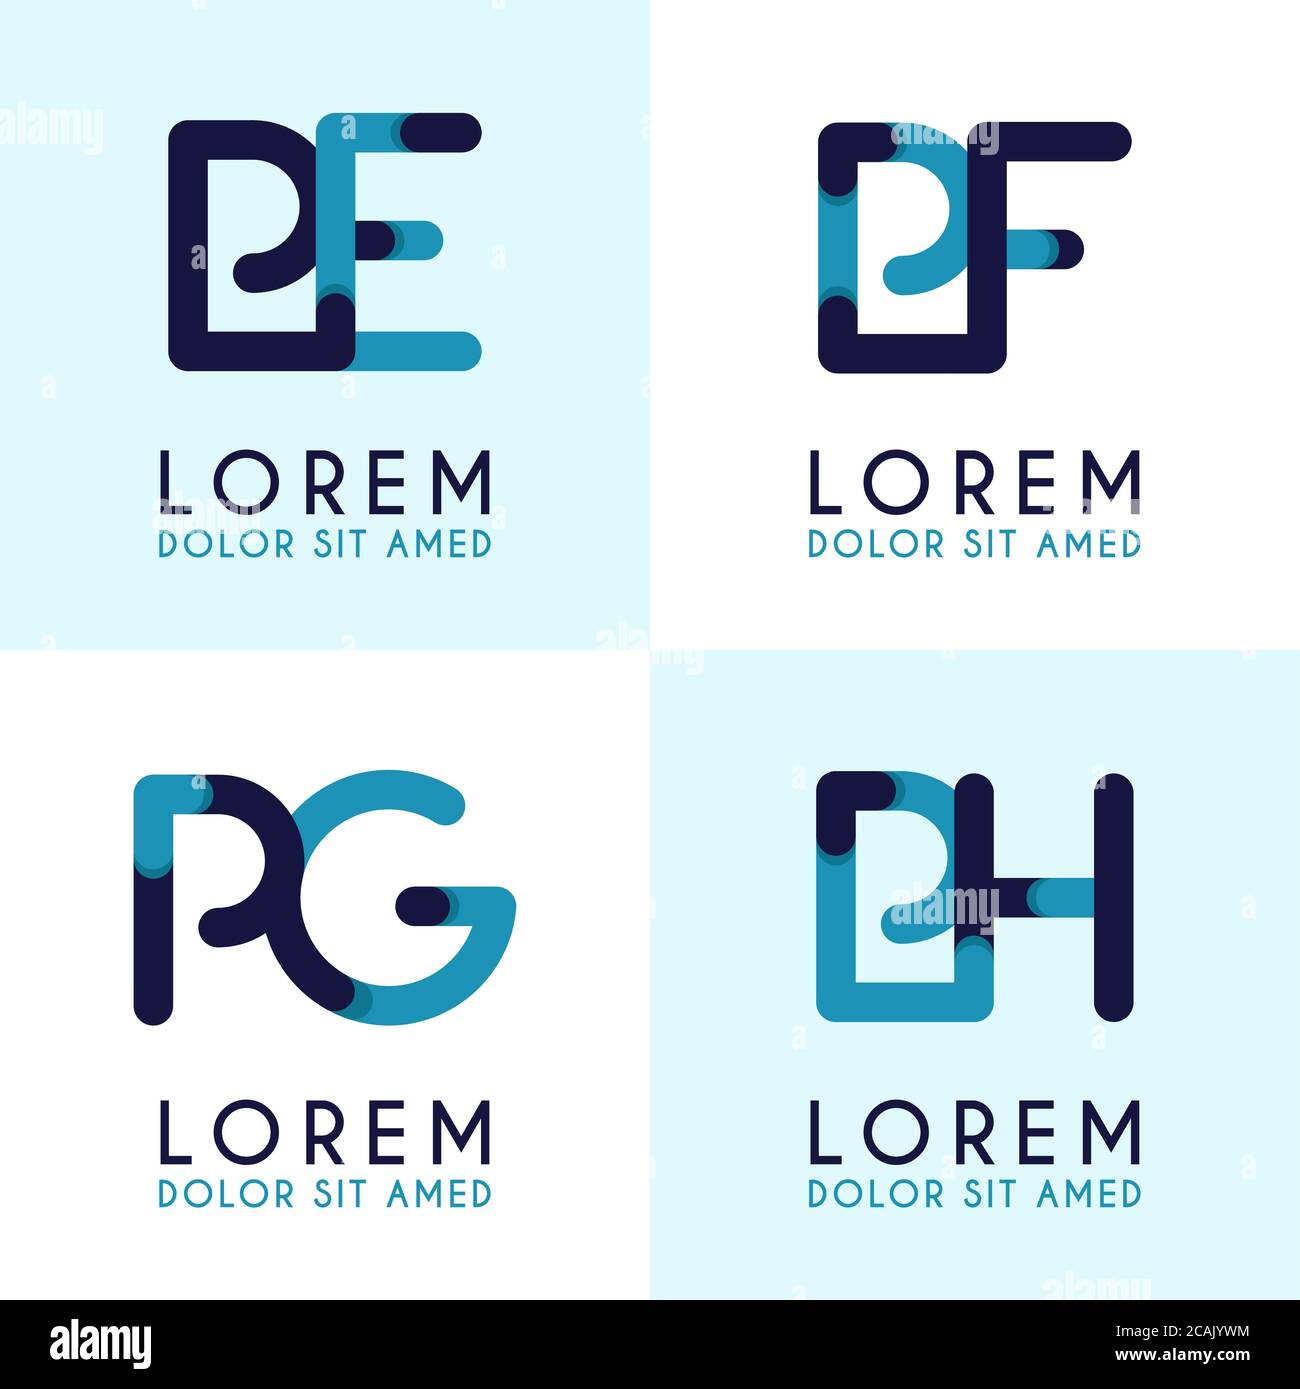 PE logo for businesses and companies. PF template logo for poster. PG logo illustration can be for websites and apps. Letter PH logo for social media Stock Vector